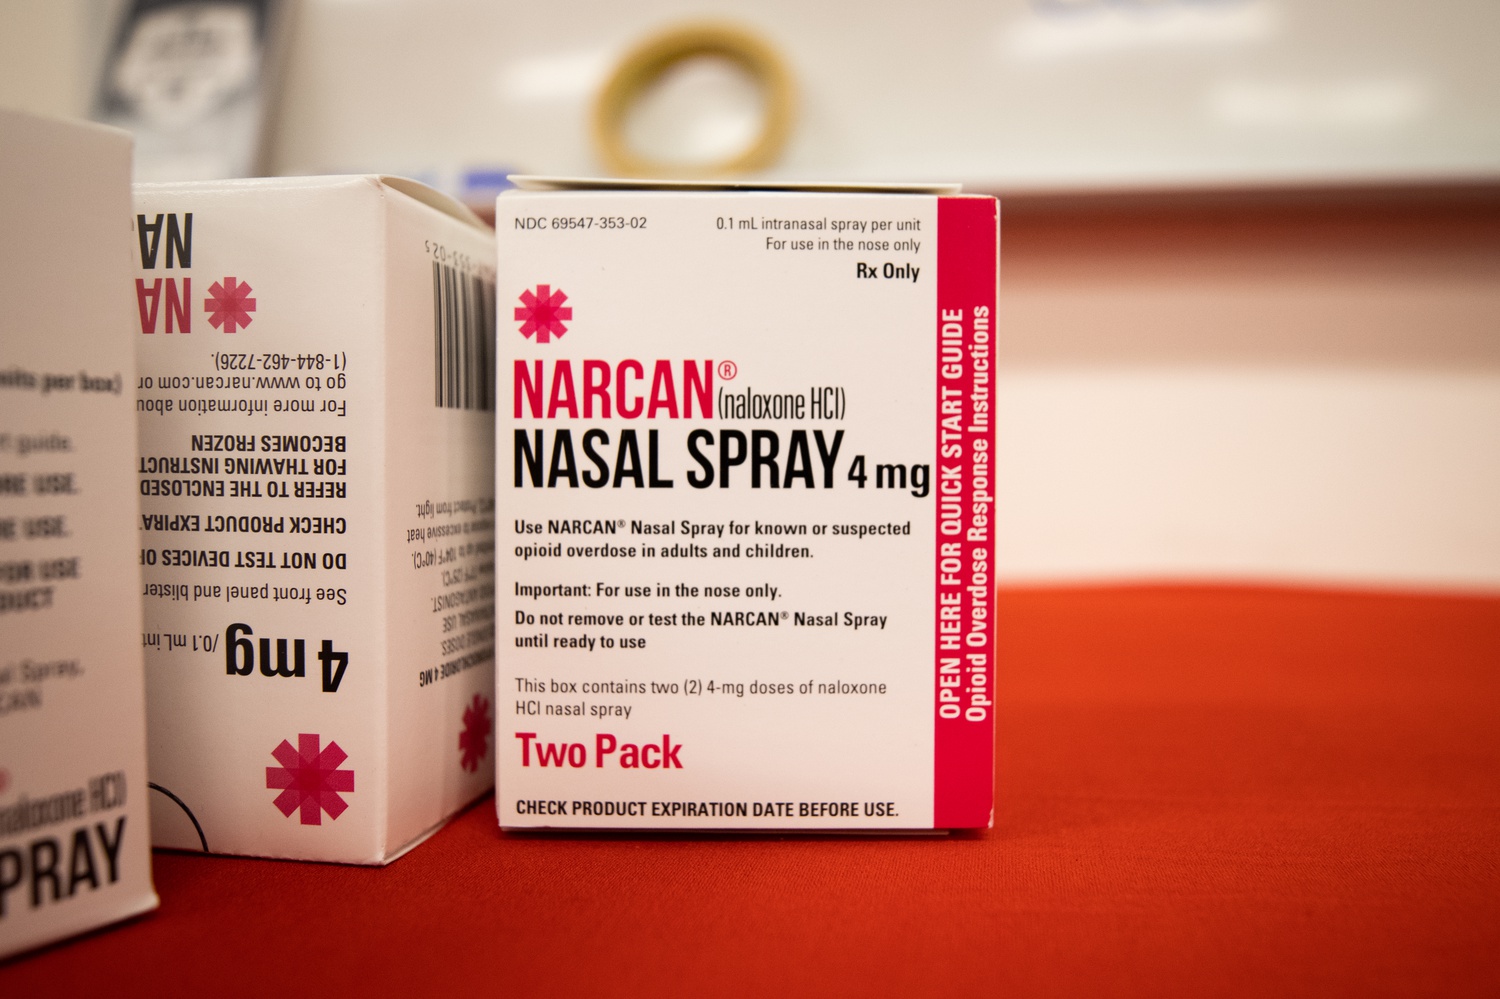 Narcan is an intranasal spray that contains the drug naloxone and can restore consciousness after an overdose.